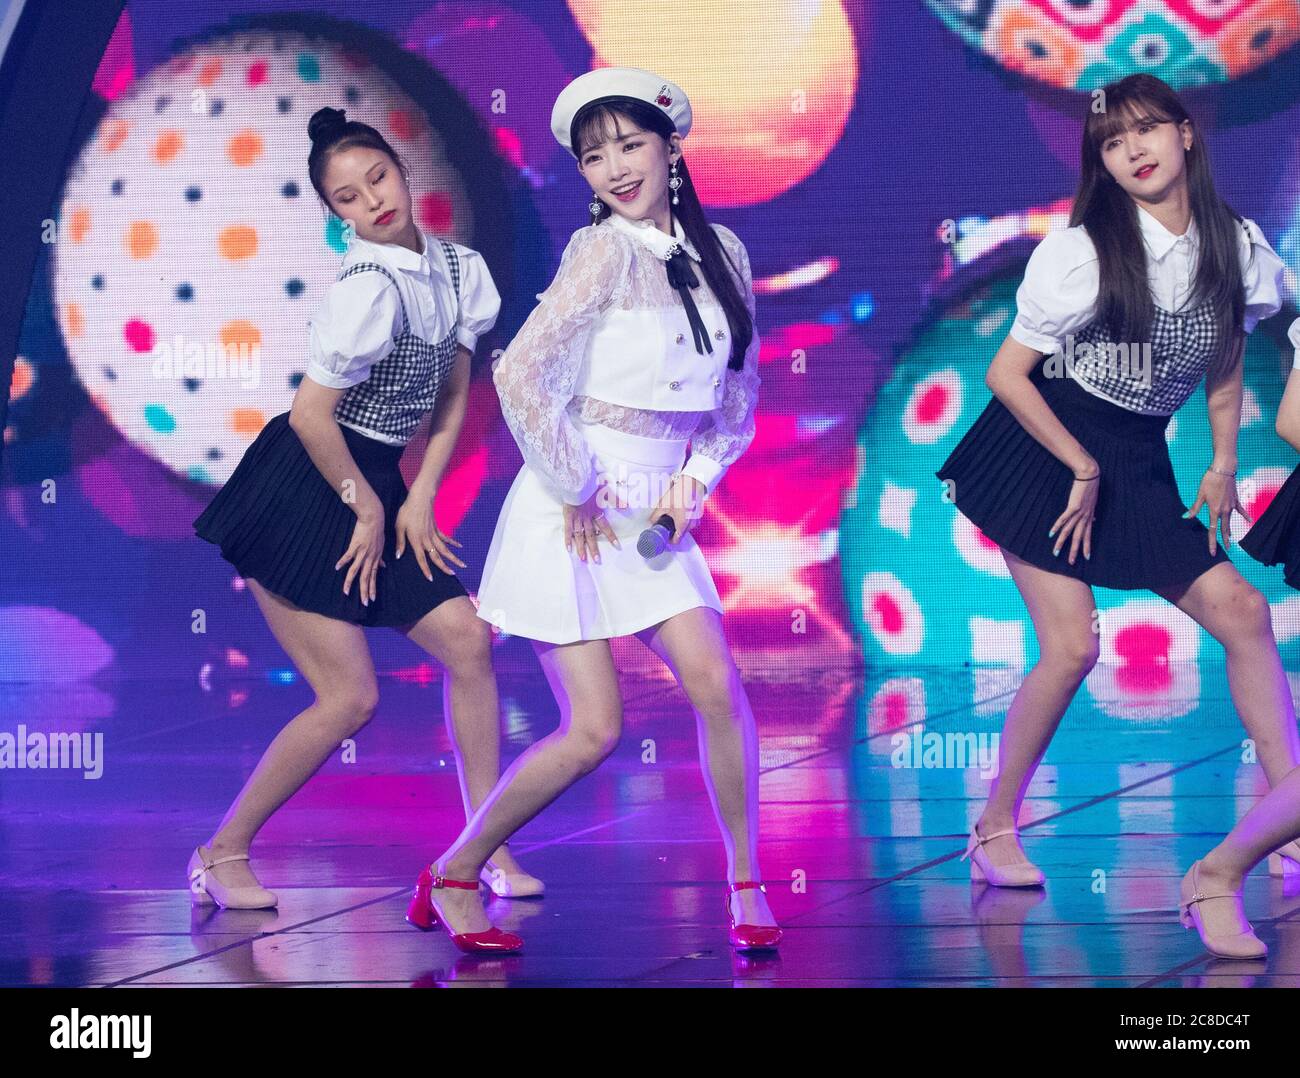 Seoul, South Korea. 22nd July, 2020. Japanese actress and singer Yukika  Teramoto, performs on the stage during a MBC TV K-Pop music chart program  'Show Champion' at MBC Dream Center in Goyang,